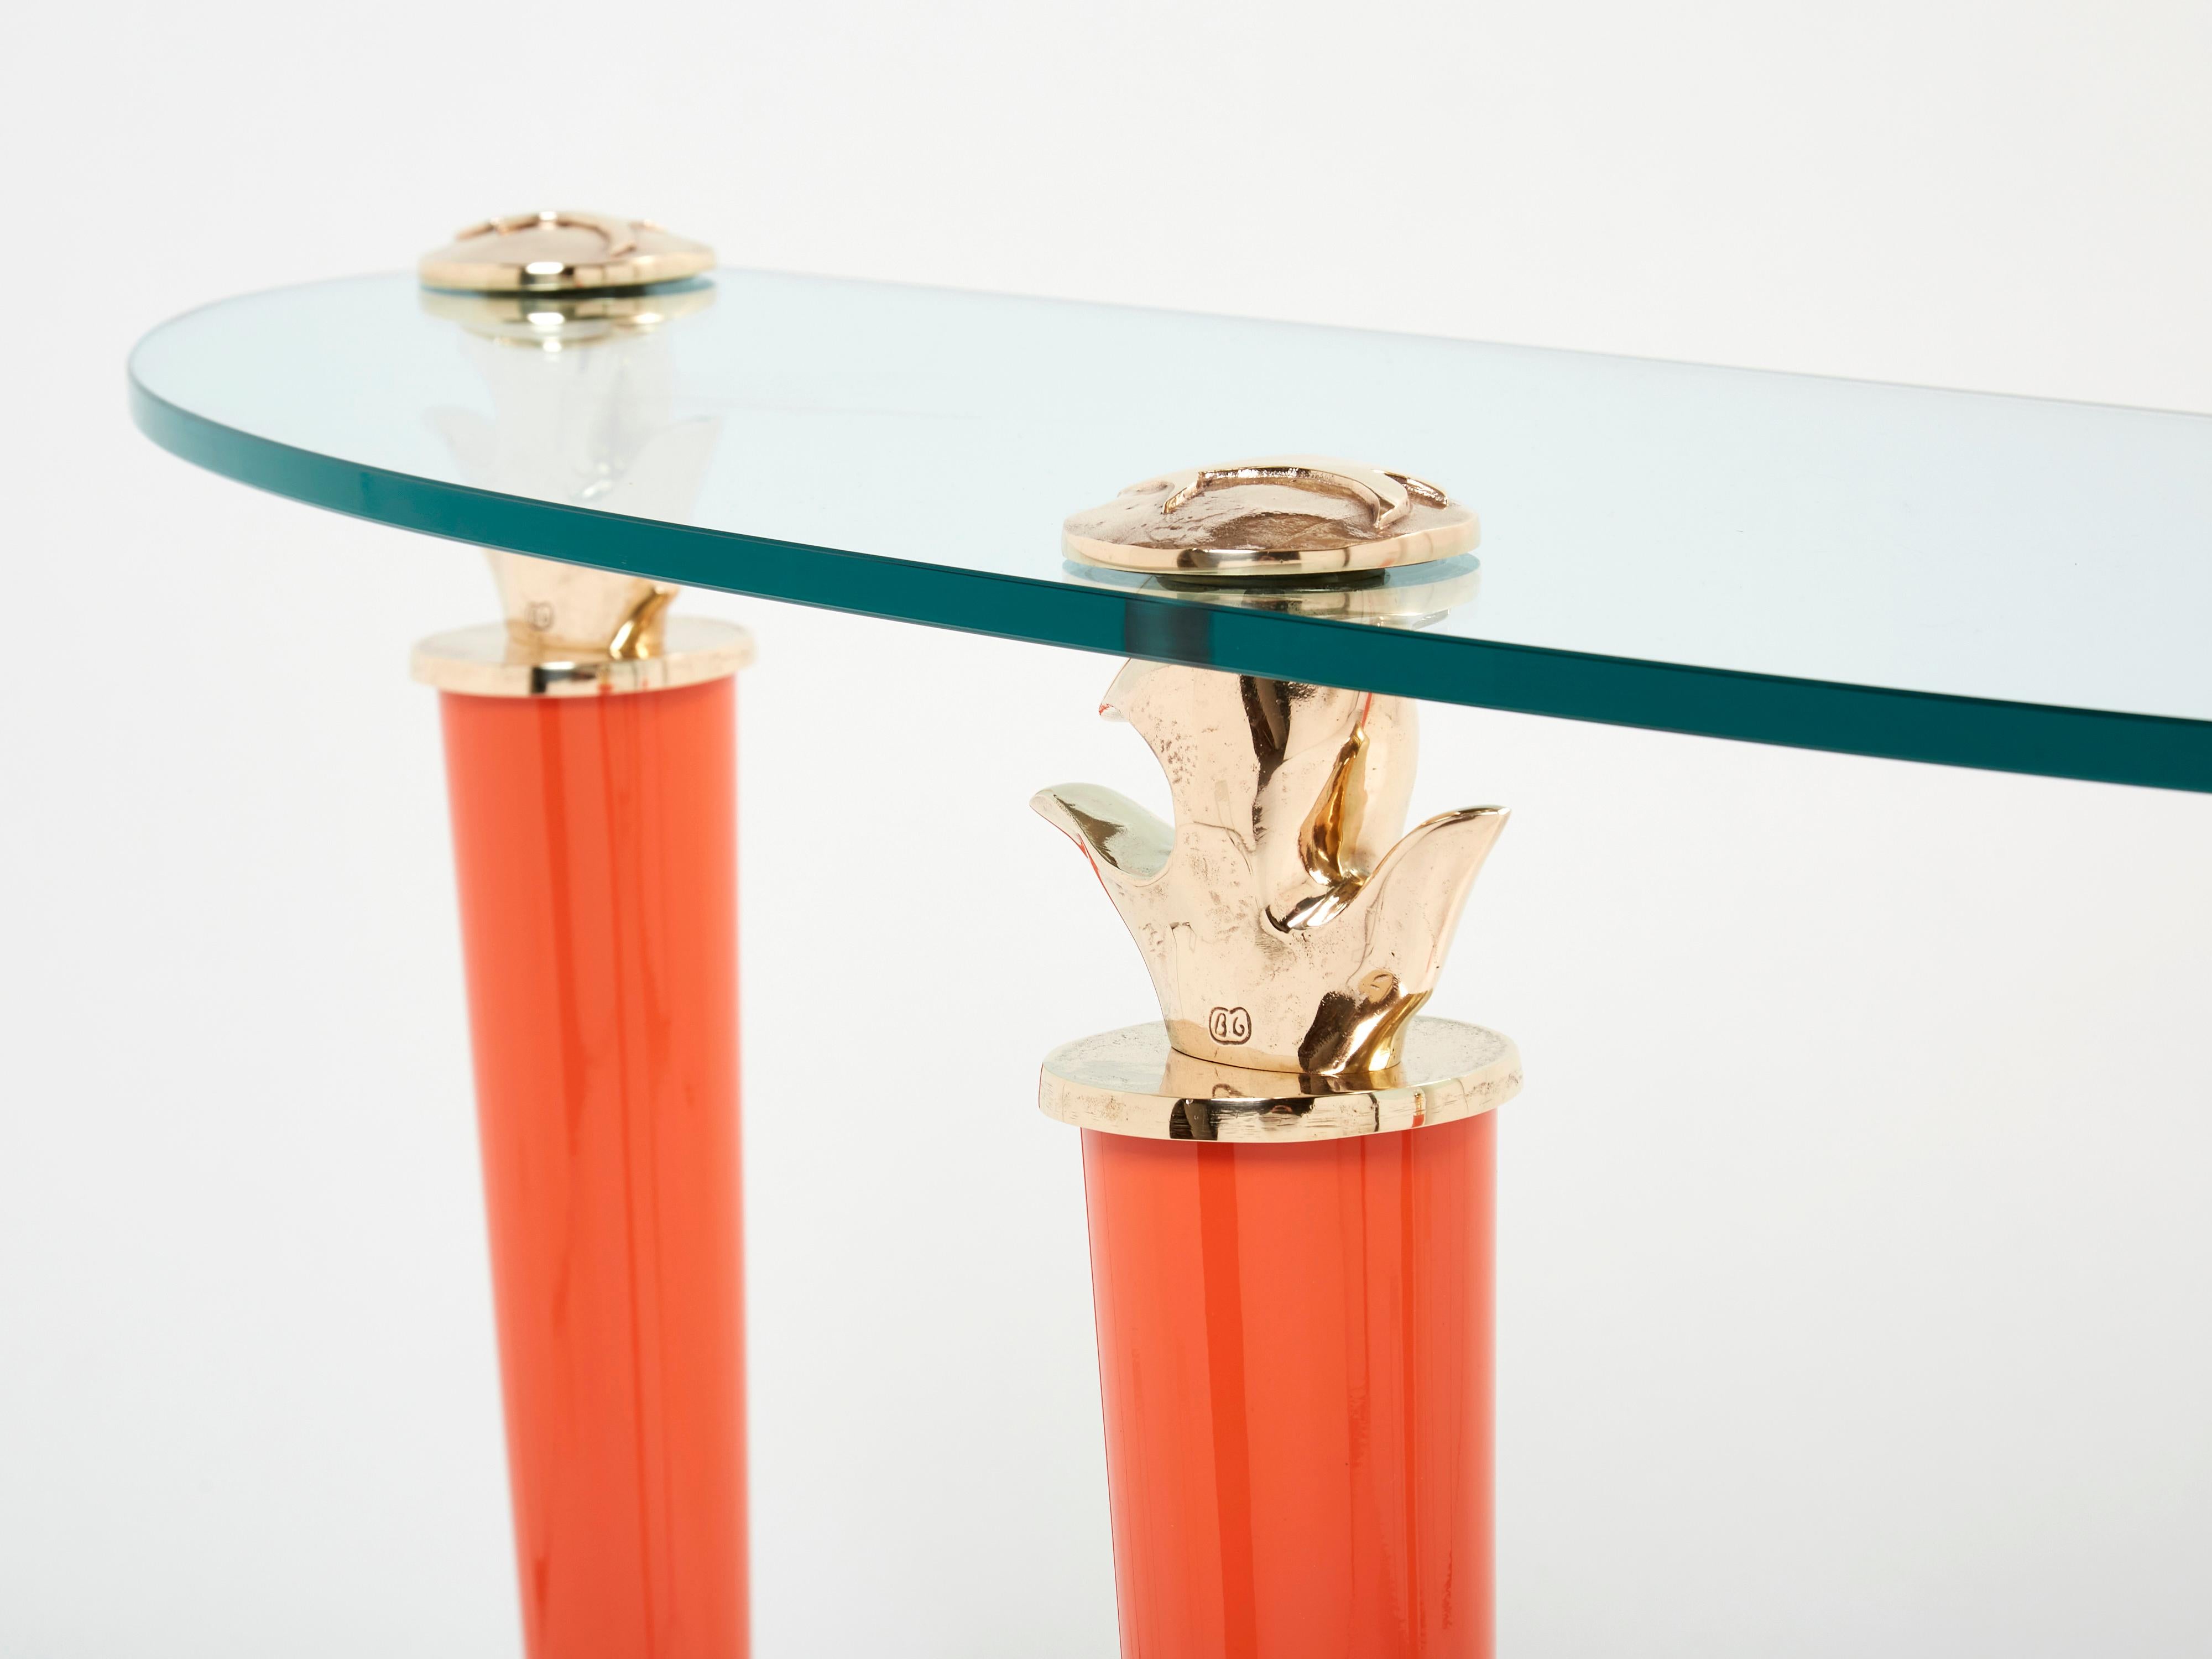 Late 20th Century Orange Lacquered and Bronze Glass Console Table by Garouste & Bonetti 1995 For Sale